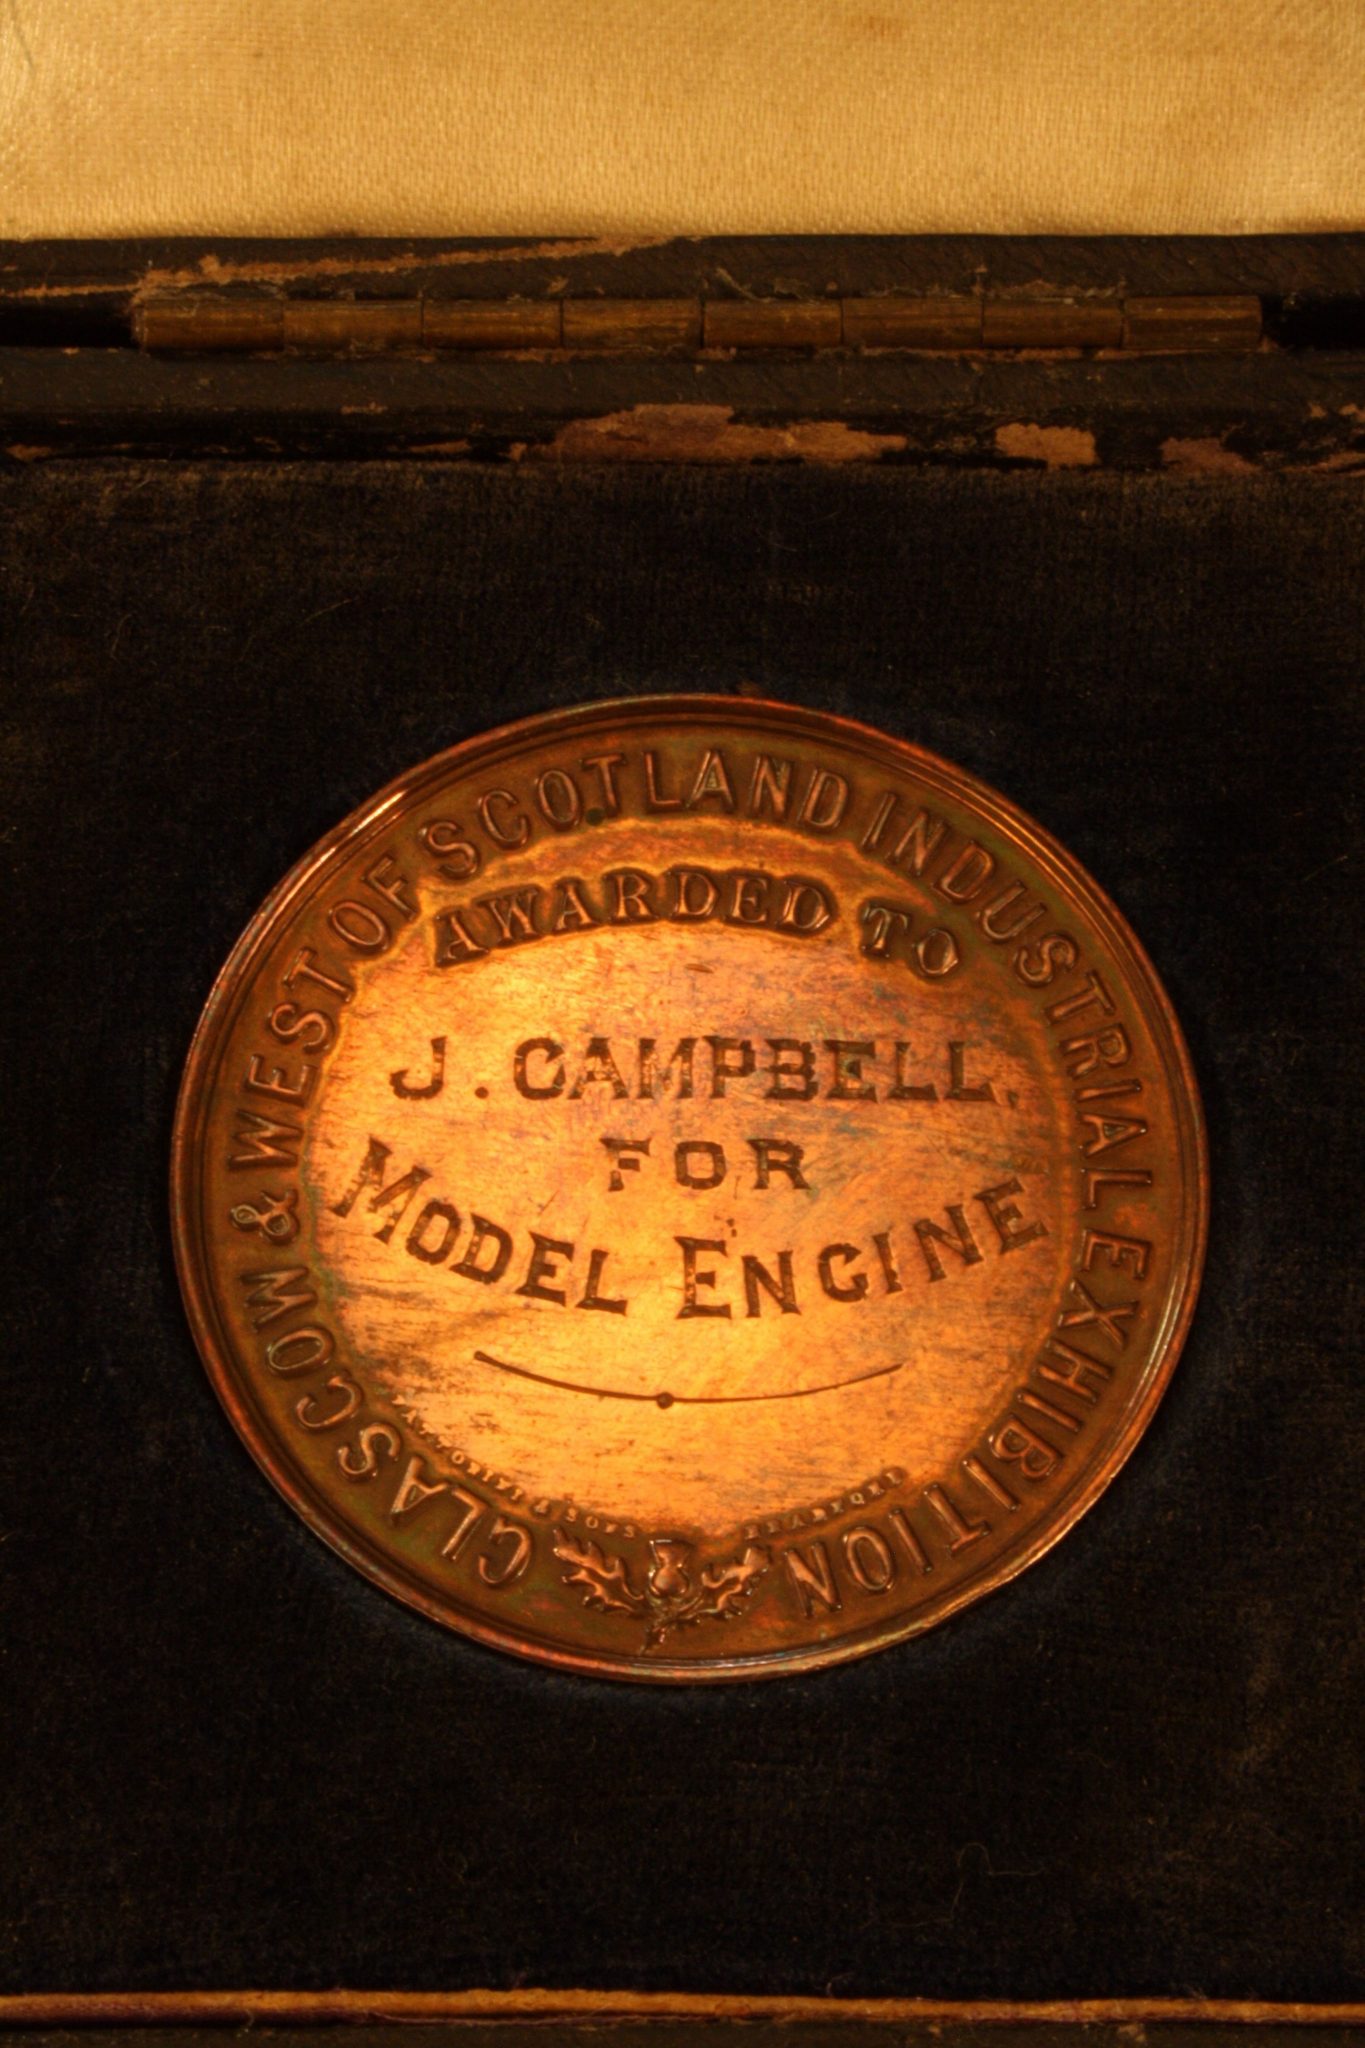 Image of Victorian Model Steam Engine Medals